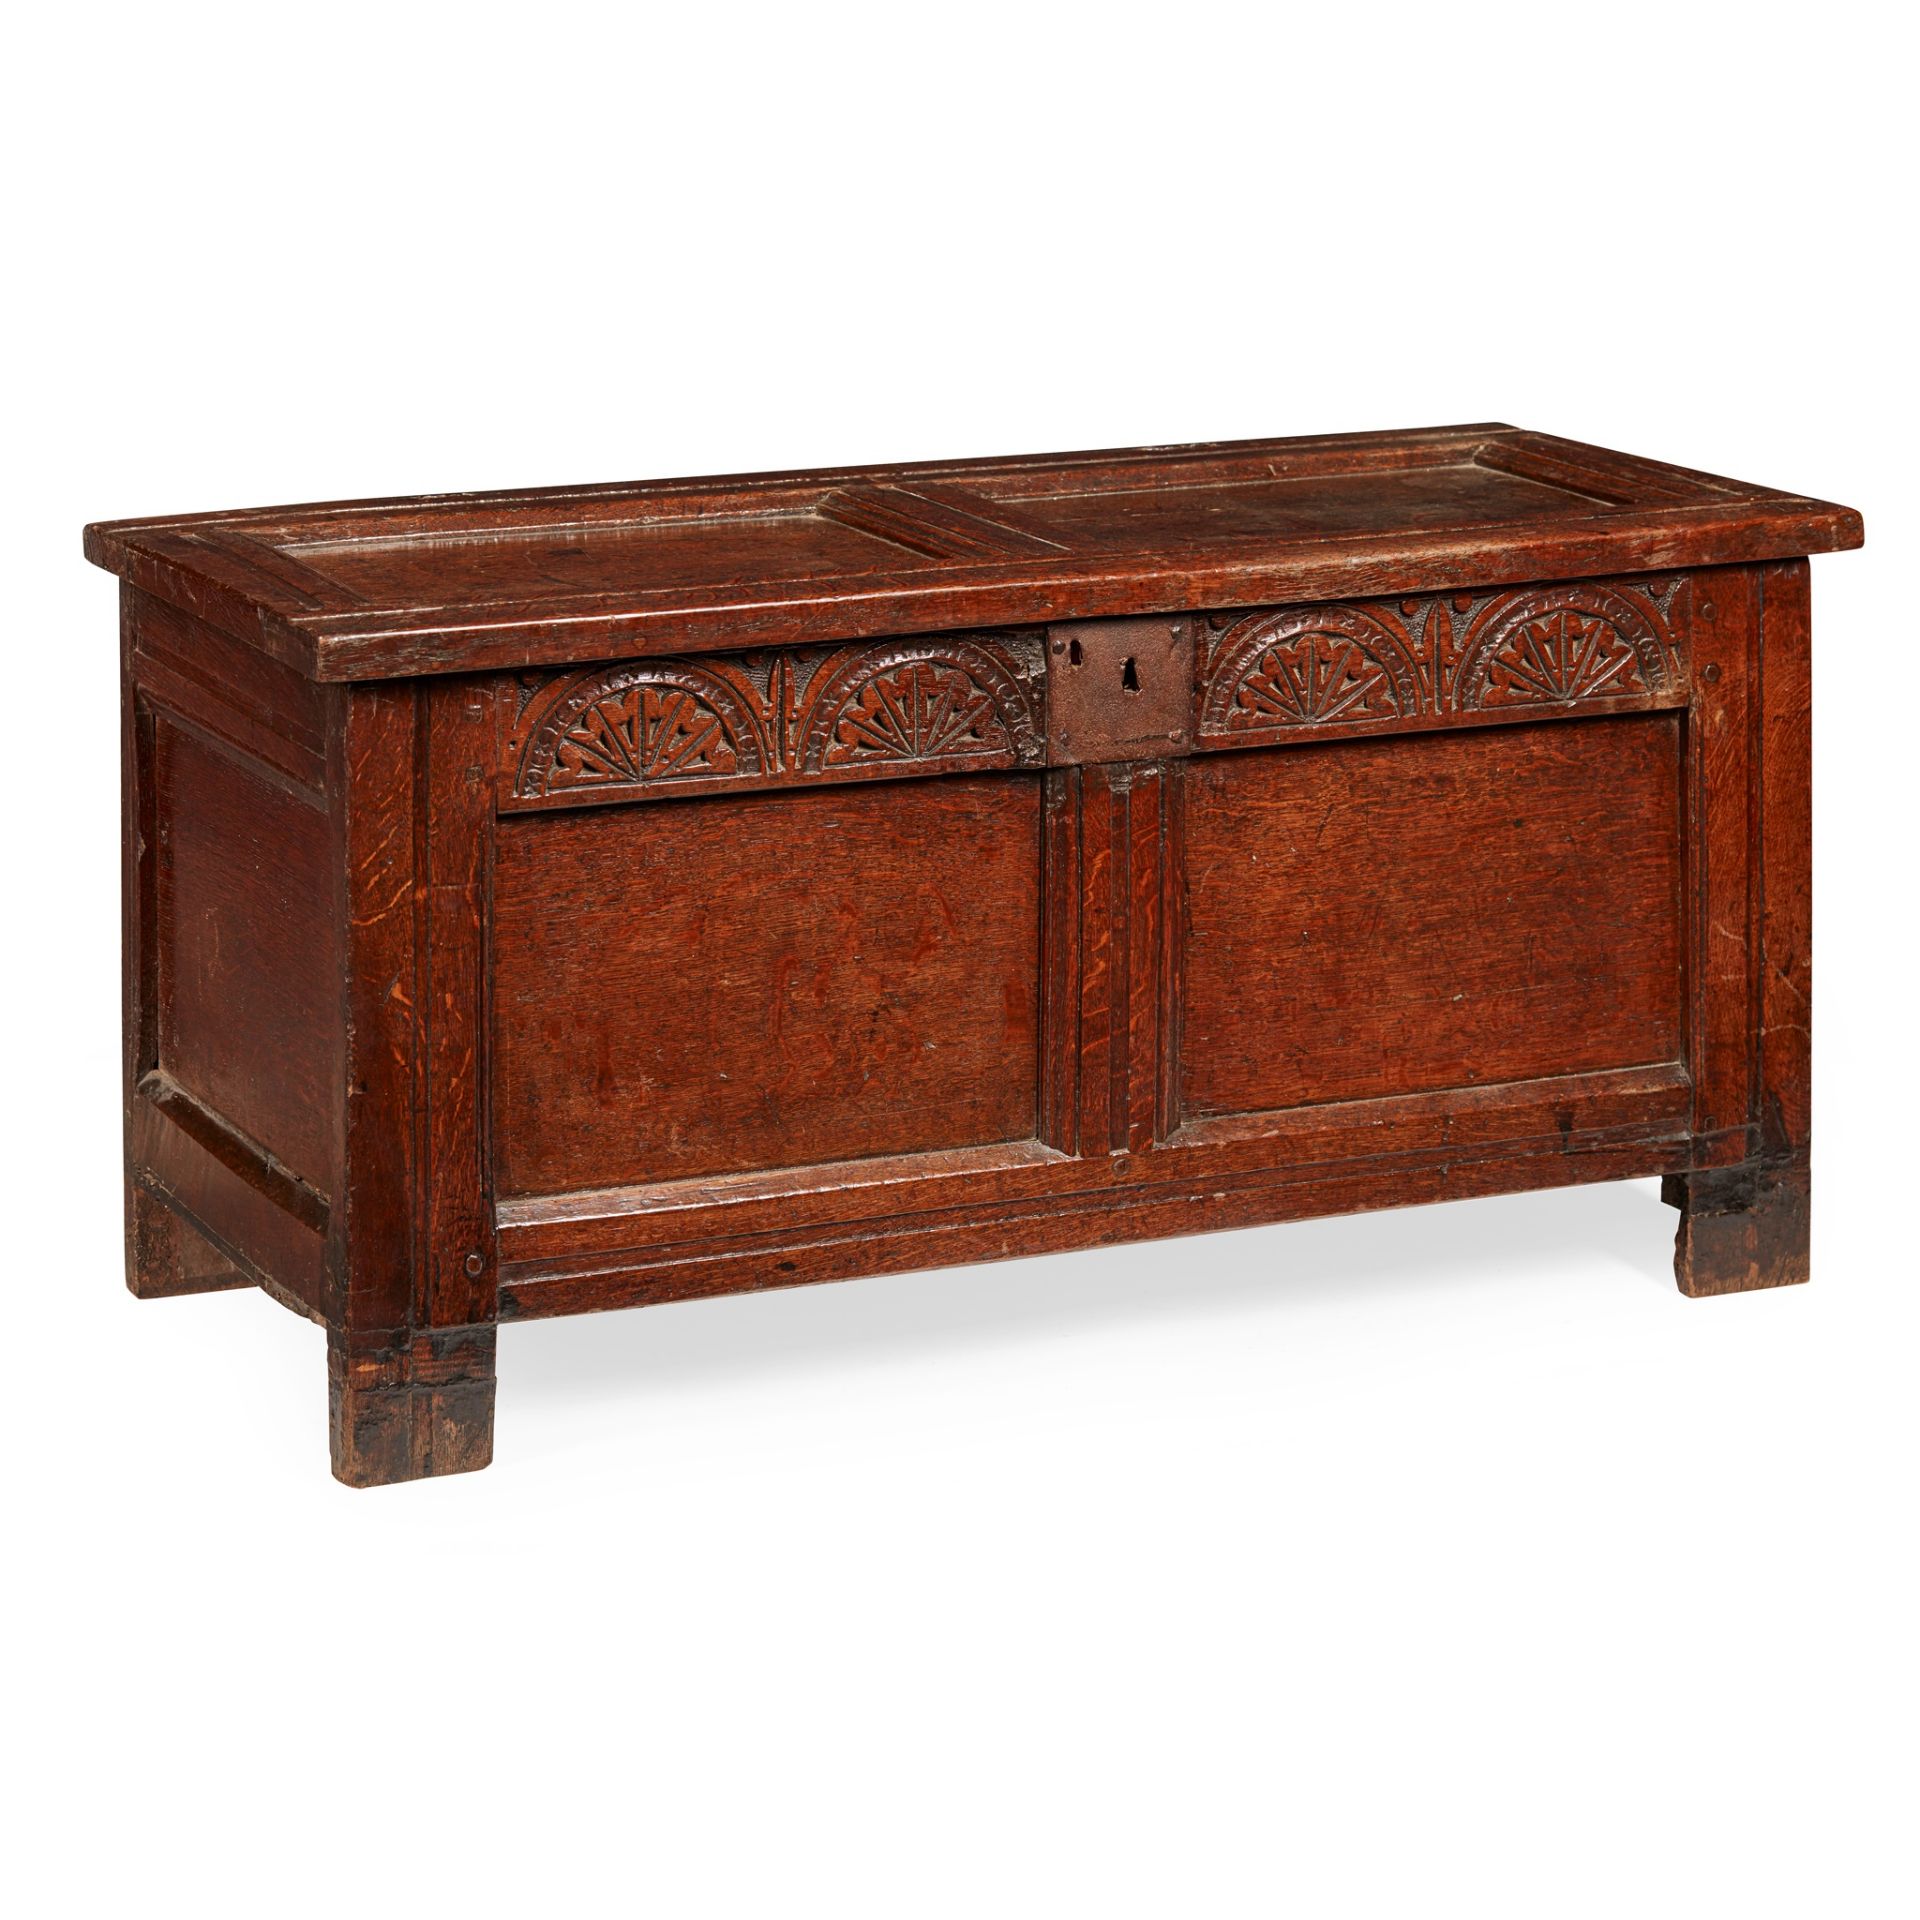 OAK PANEL CHEST LATE 17TH/ EARLY 18TH CENTURY